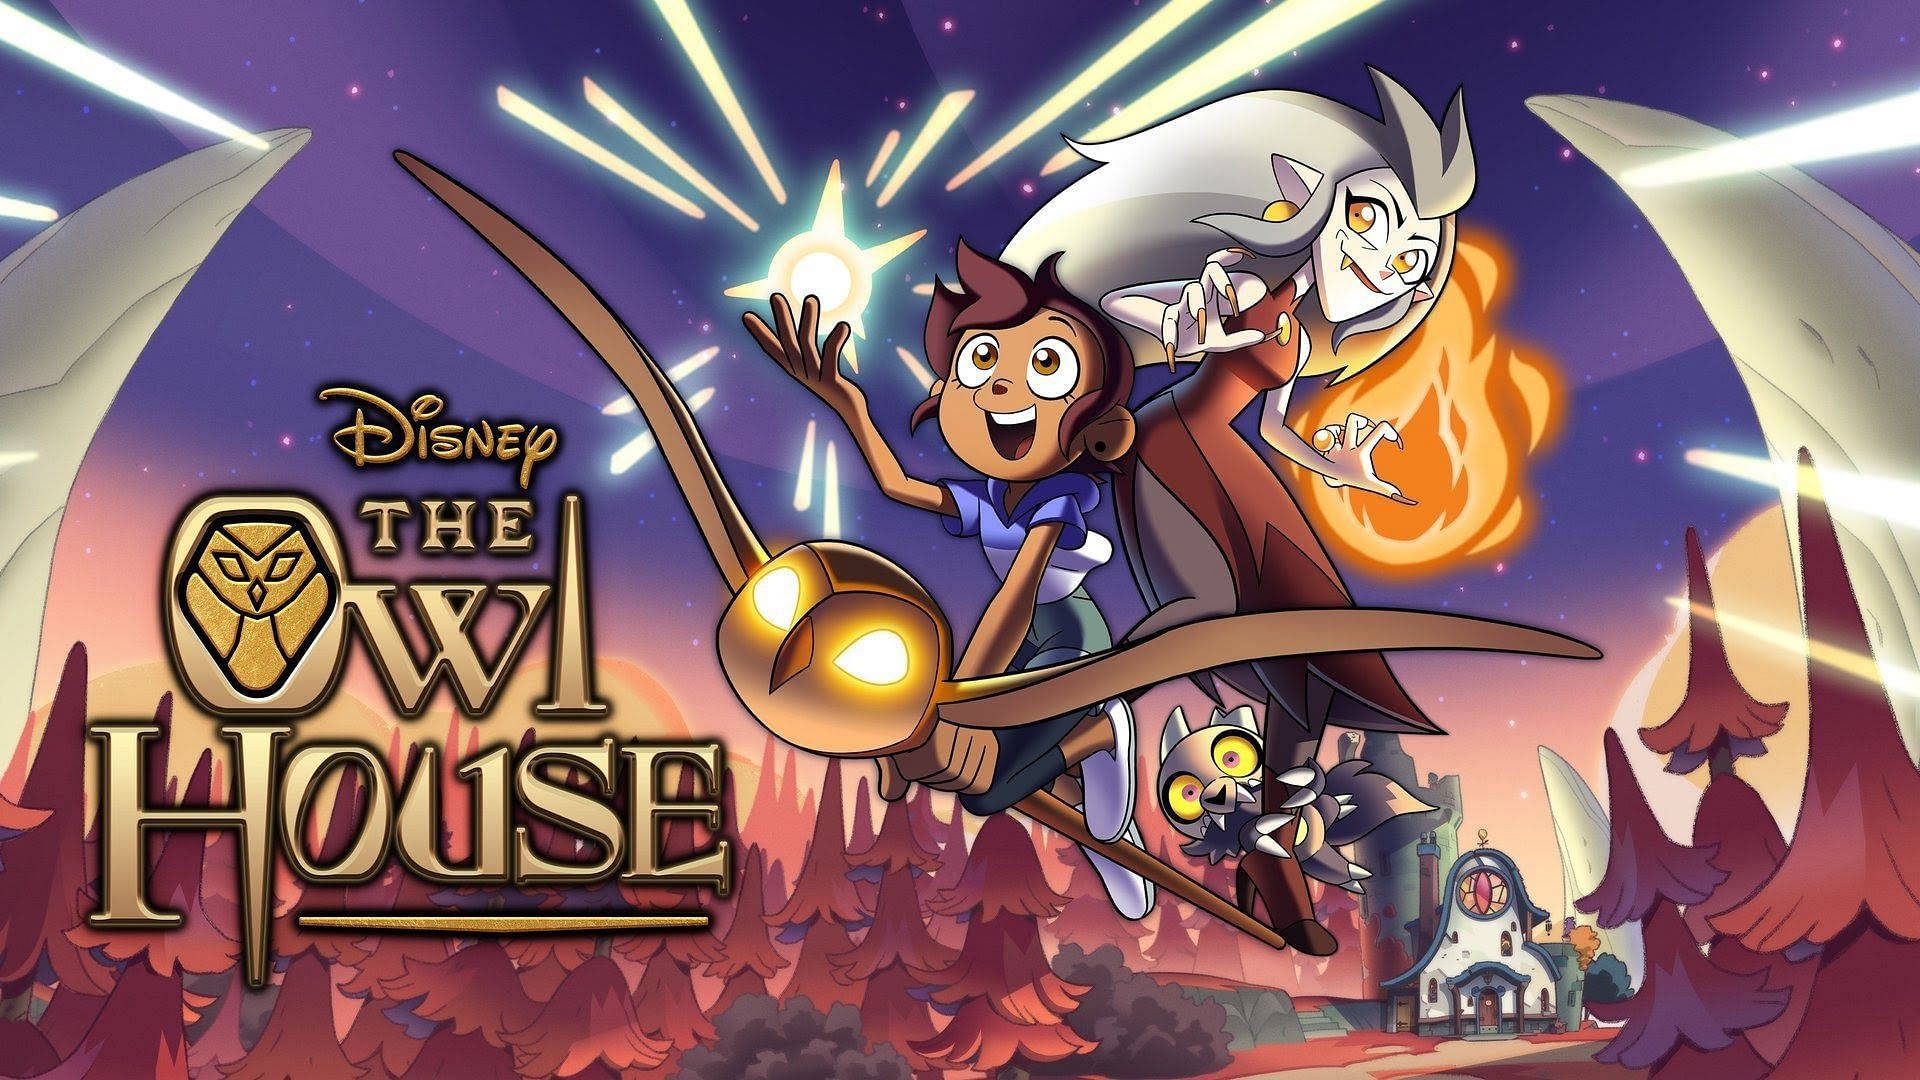 Join Luz and her friends as they face new challenges in The Owl House season 3! Recap of episodes 1 and 2 (Image via Disney)